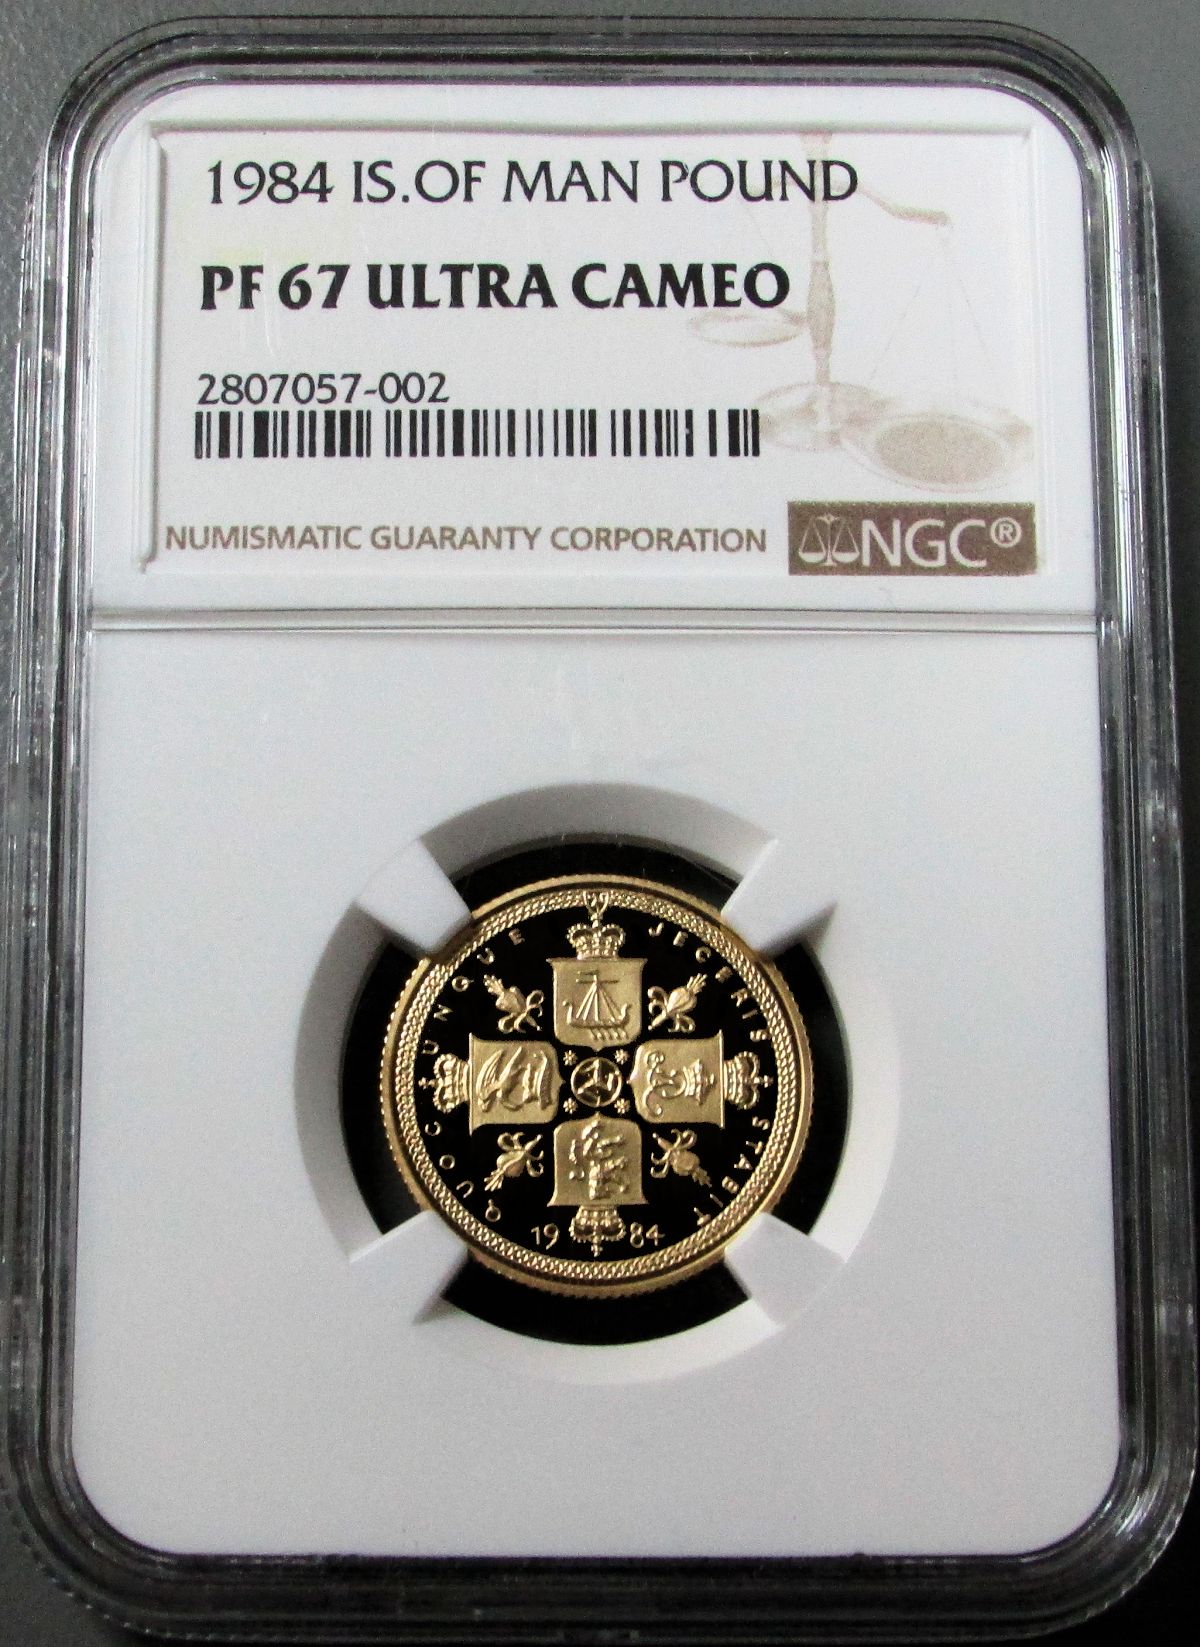 1984 GOLD ISLE OF MAN 1 POUND SOVEREIGN COIN NGC PROOF 67 ULTRA CAMEO LESS THAN 10 MINTED